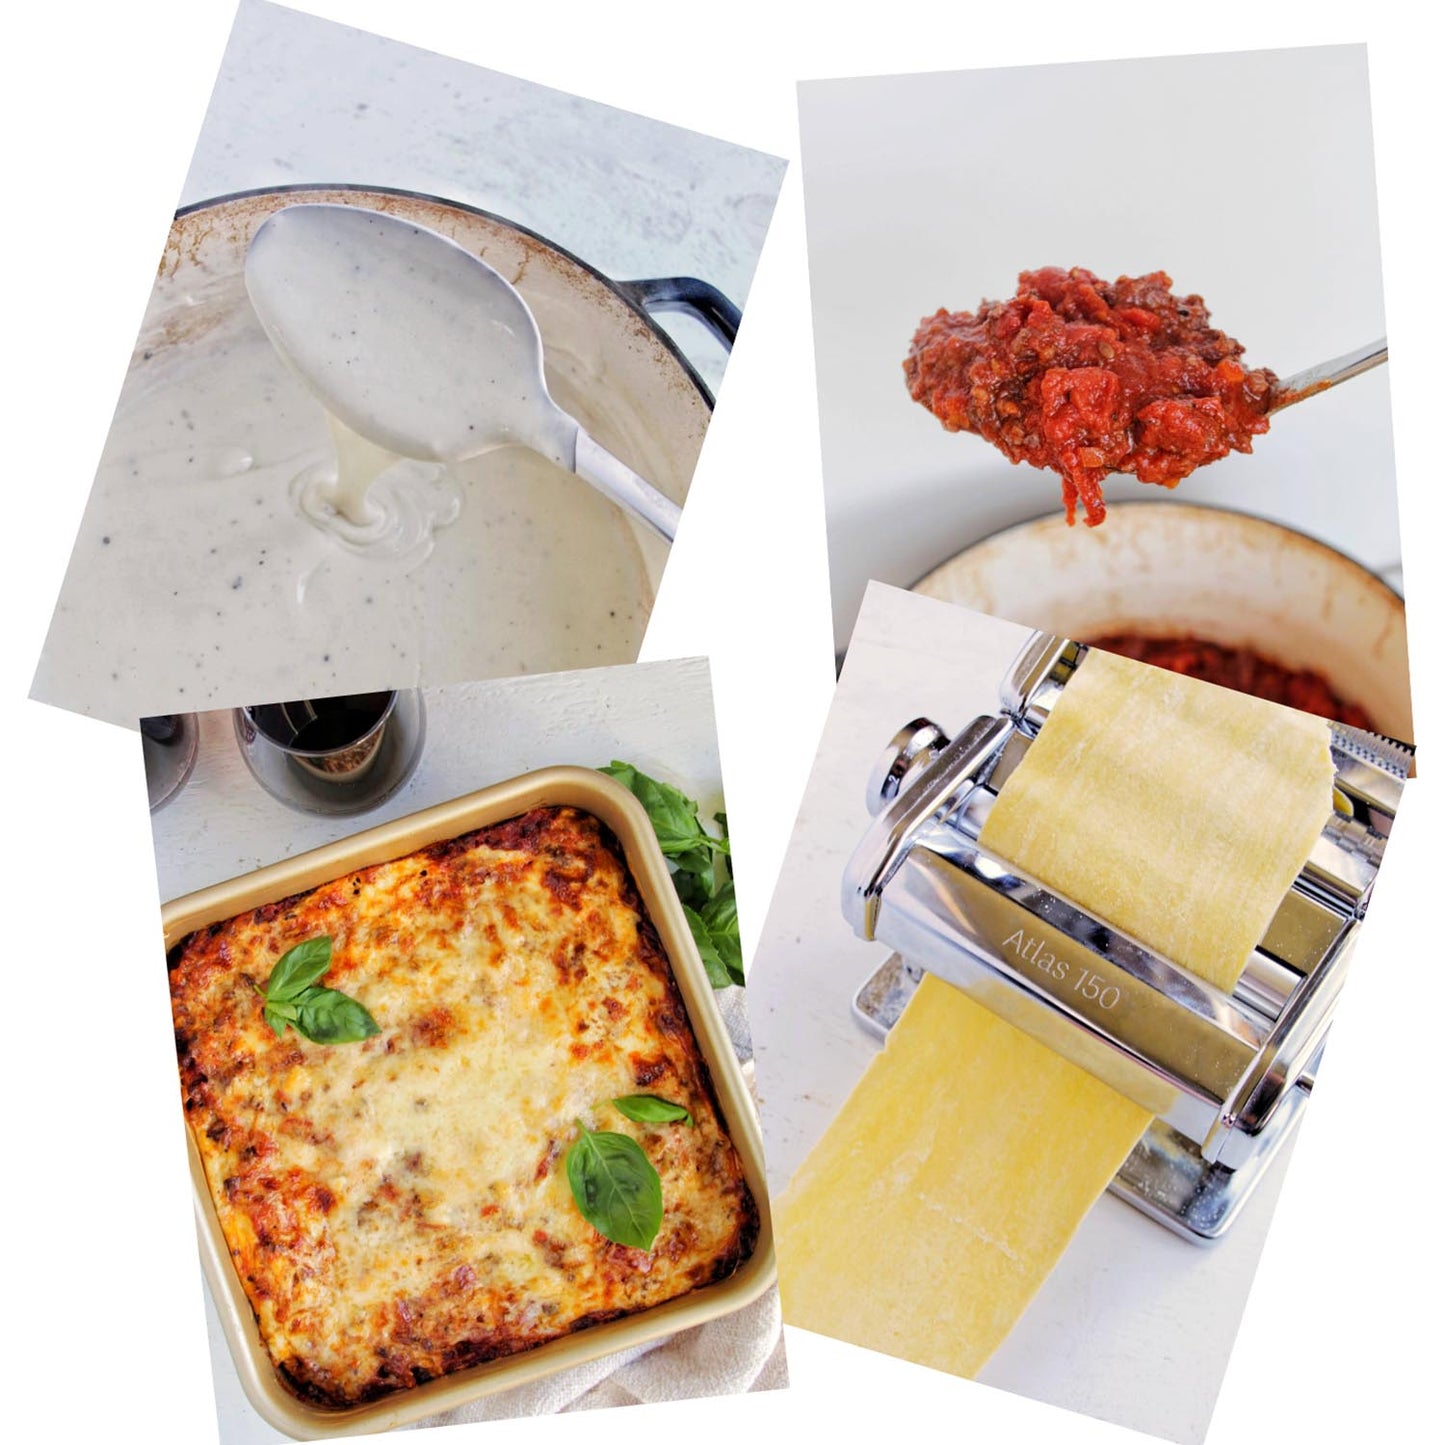 Pictures of lasagna ingredients promoting the Authentic Italian Lasagna course.